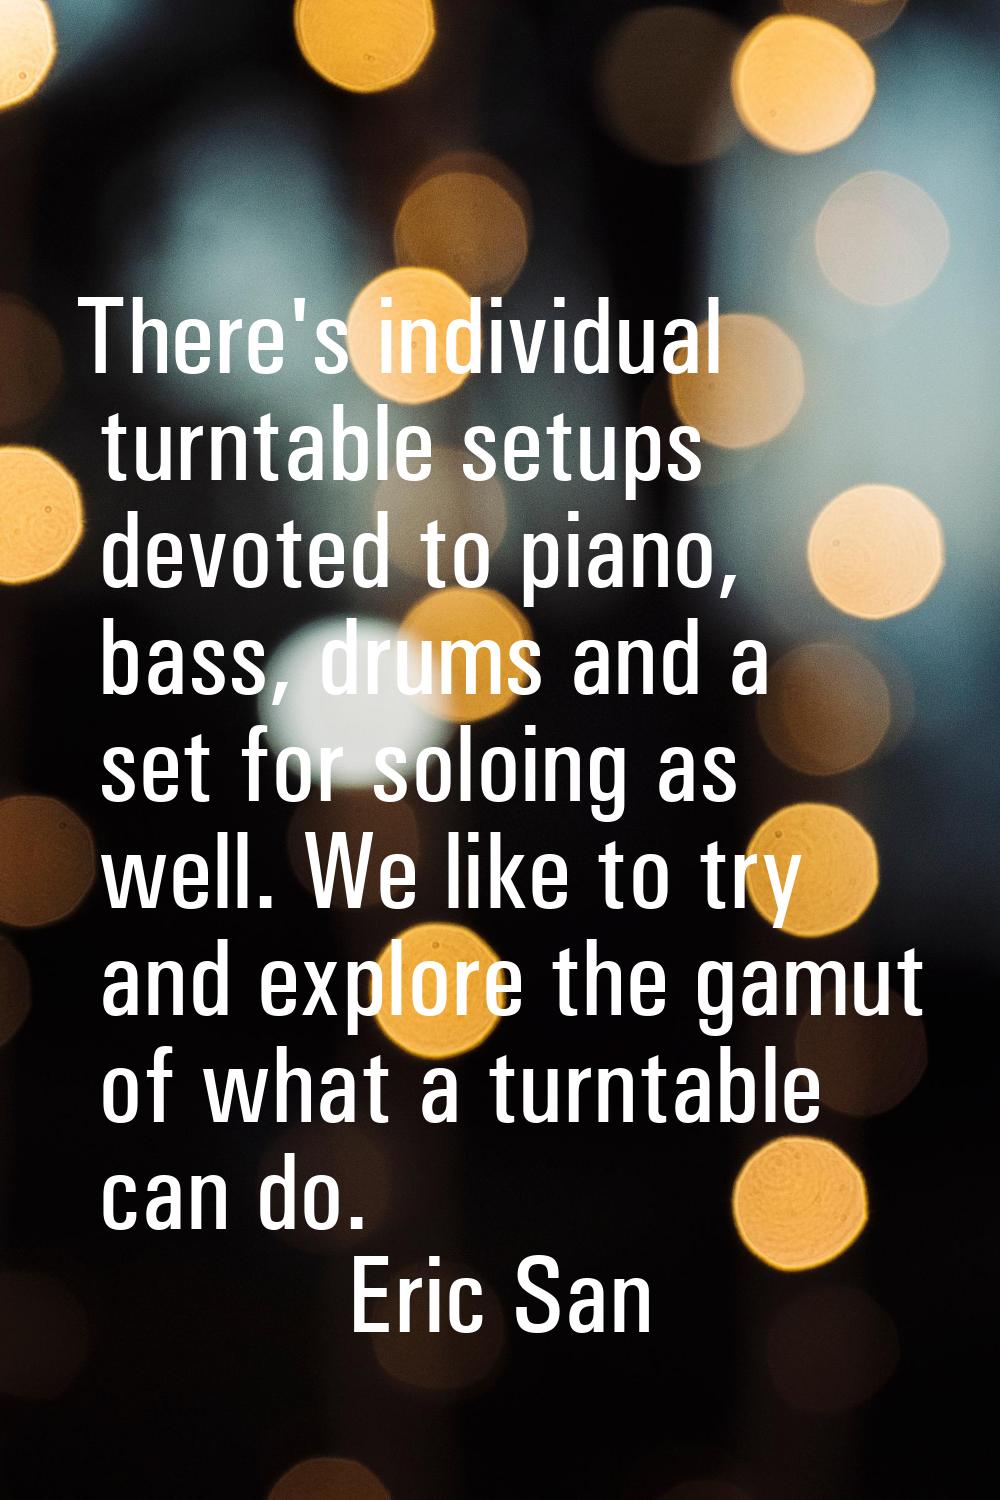 There's individual turntable setups devoted to piano, bass, drums and a set for soloing as well. We